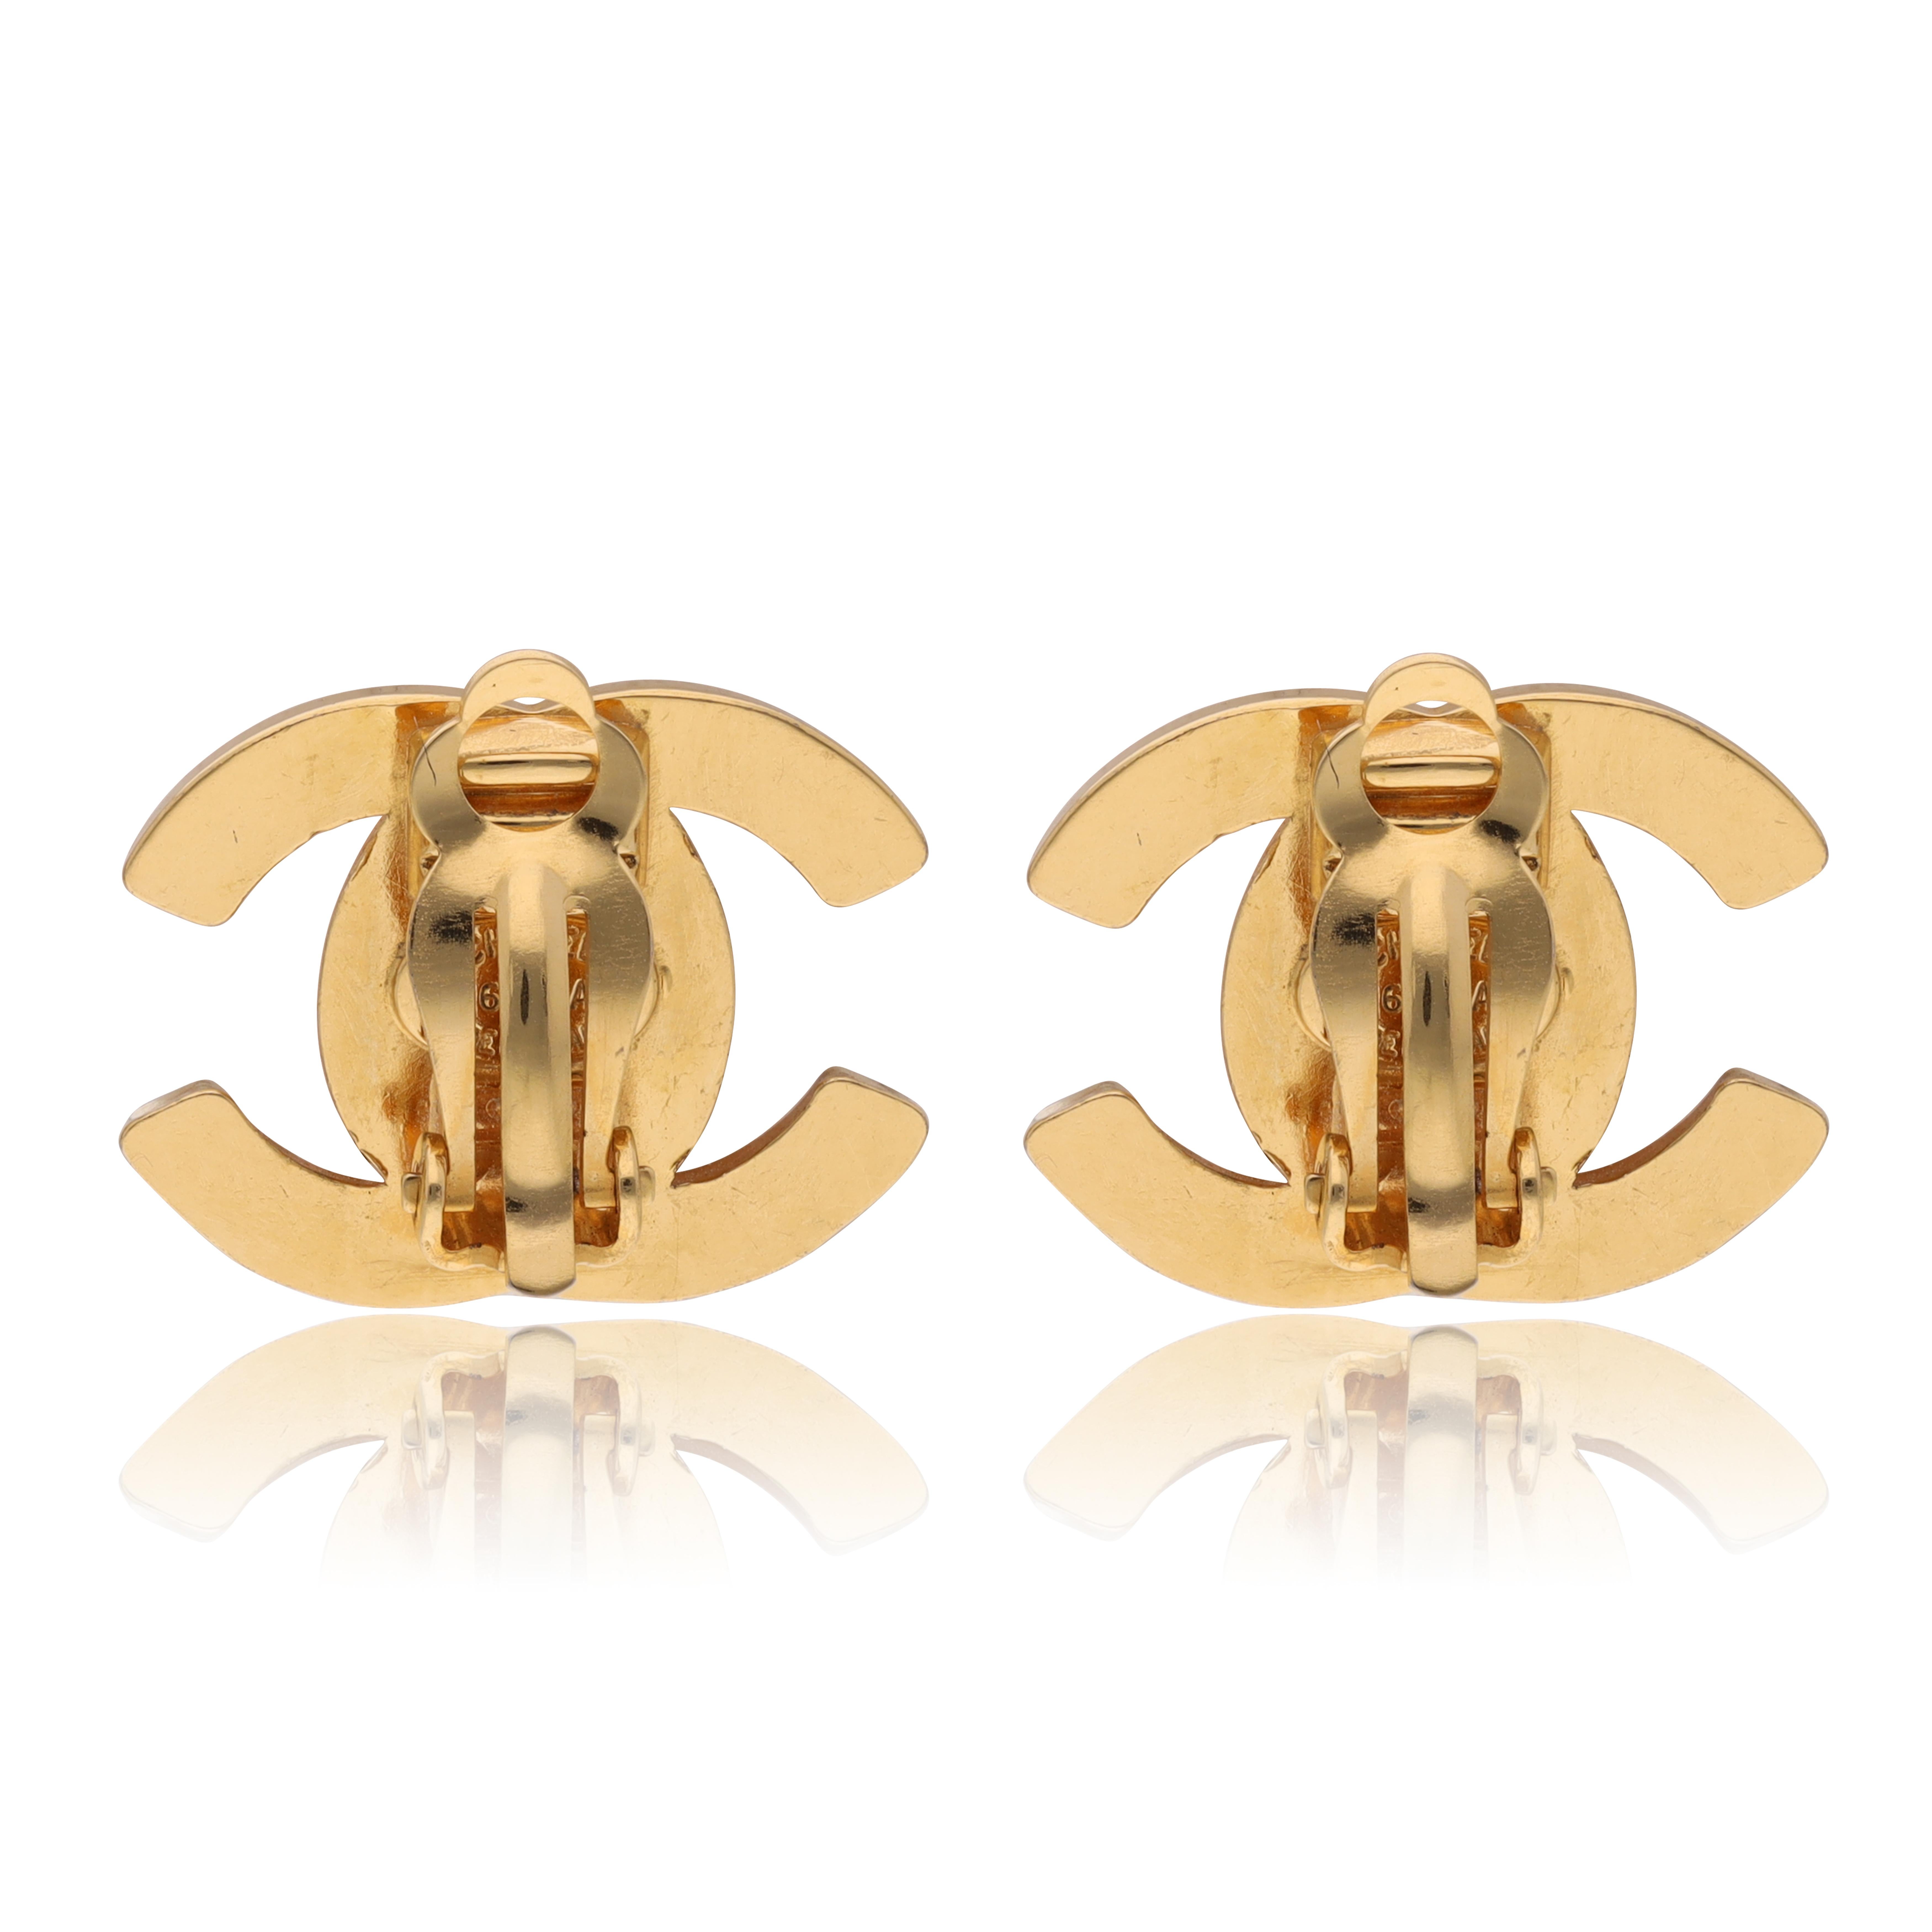 Crafted from glossy gold-tone metal, these Vintage Chanel Turnlock Double CC Logo Ear Clips offer the perfect blend of modern sophistication and classical charm. Alluringly understated yet evoking a luxurious sense of quality and taste, they will